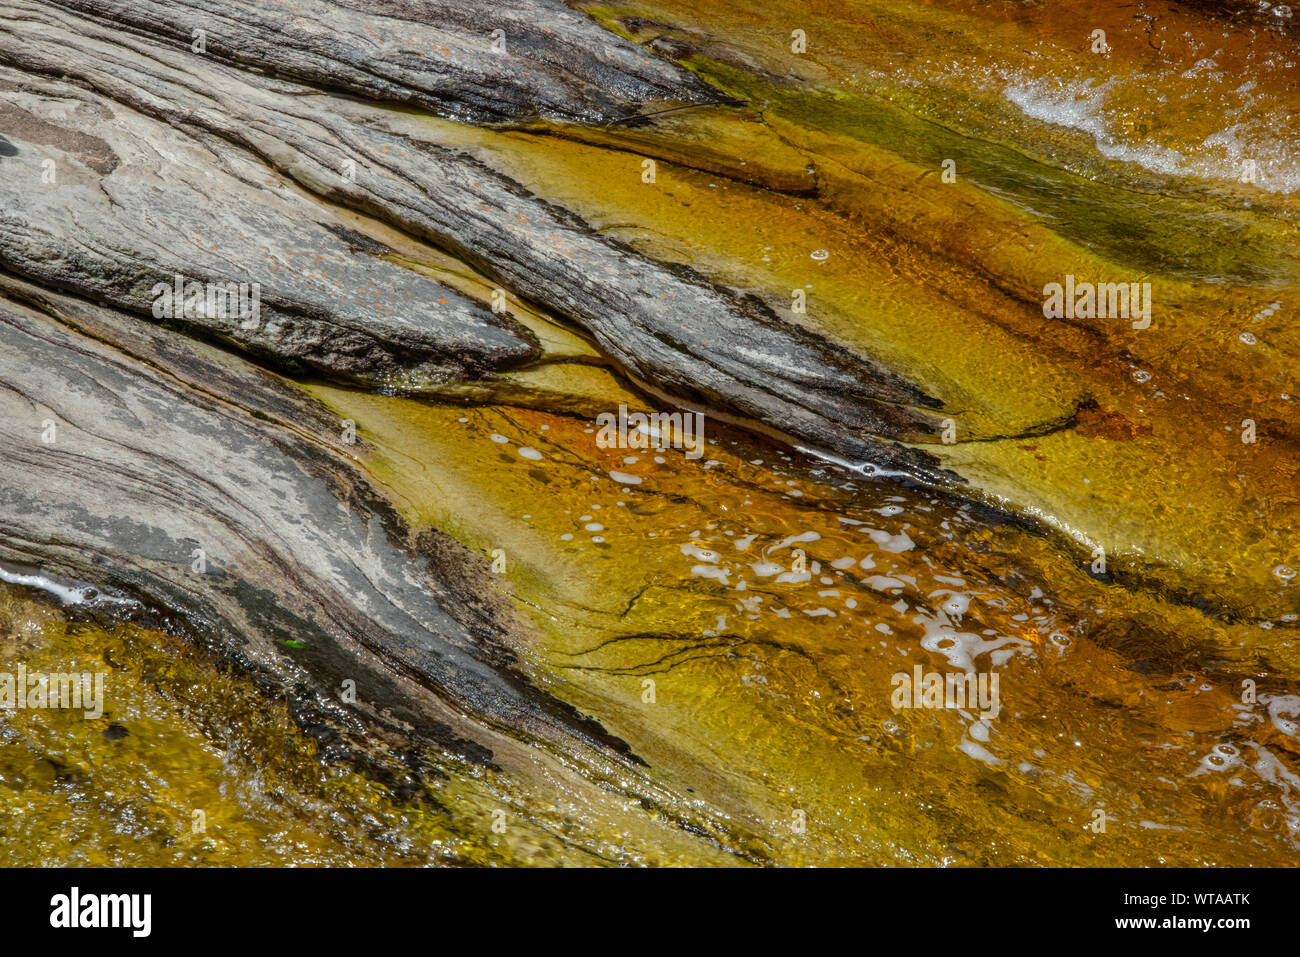 Abstract formation of rocks and water on river Stock Photo